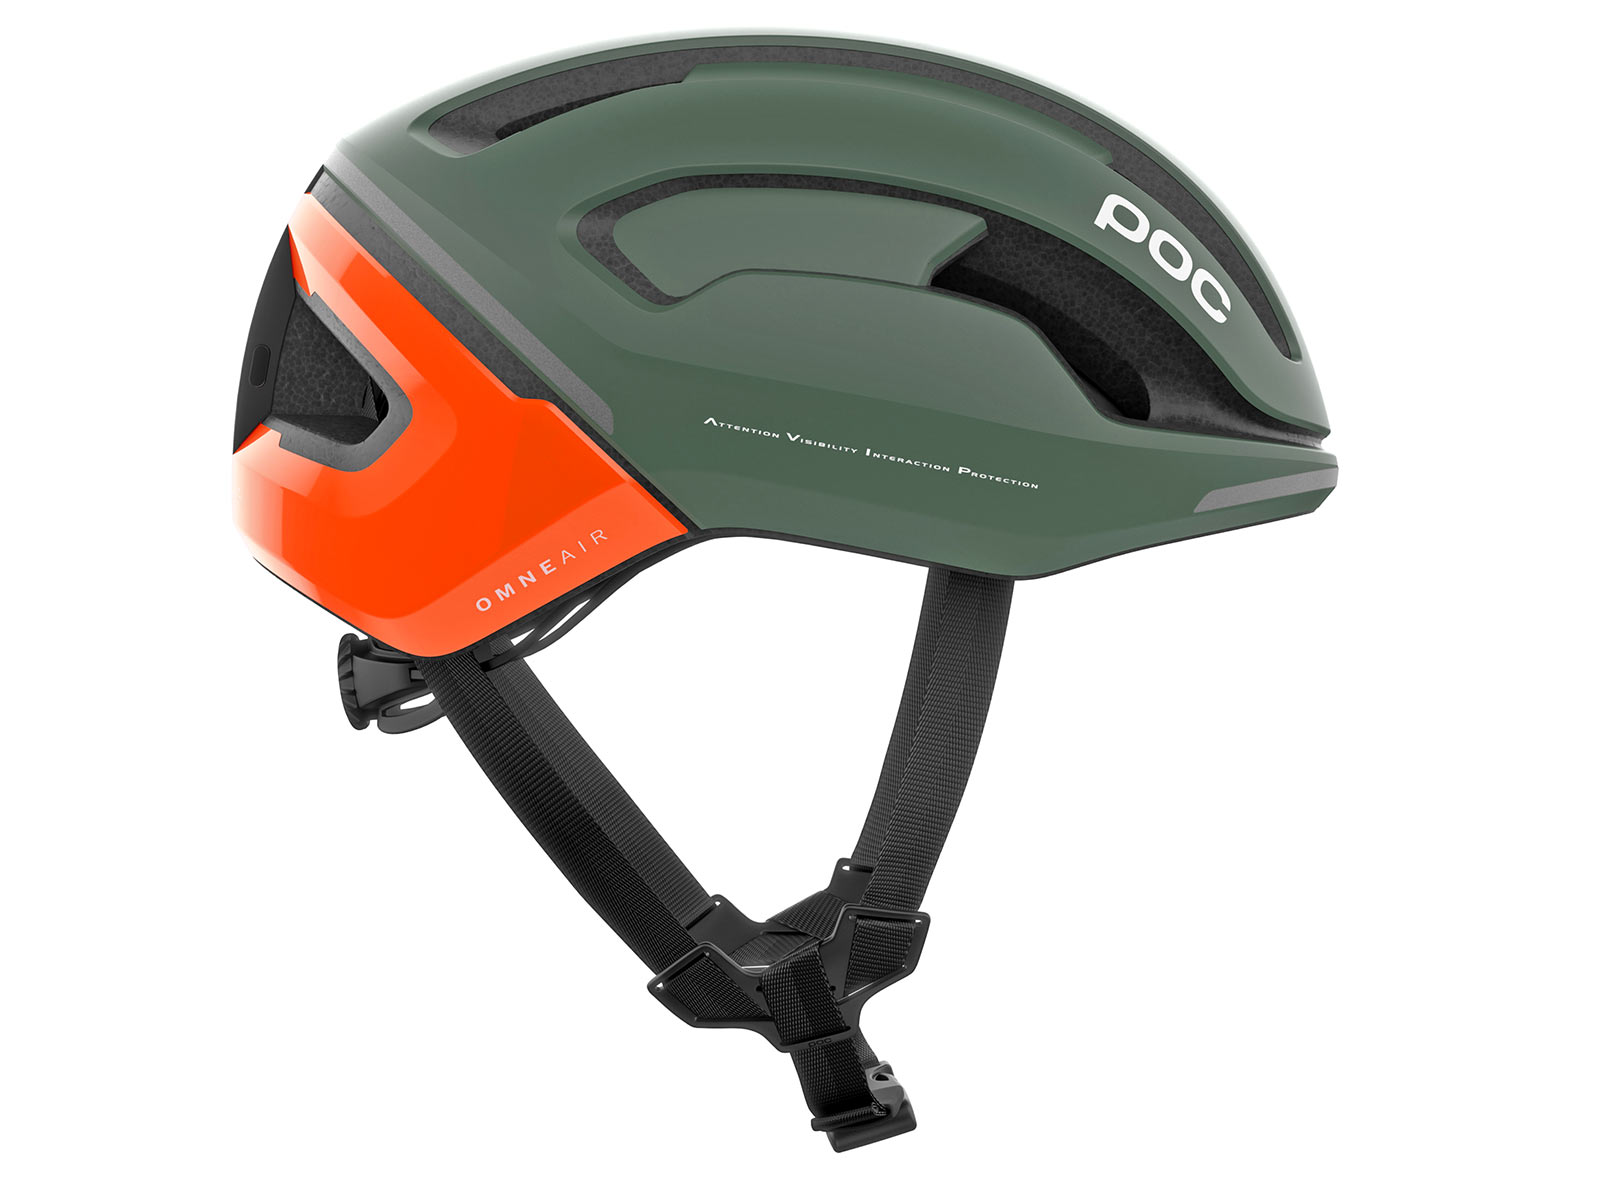 POC-Omne-Beacon-helmet-with-integrated-LED-taillight_green-side.jpg